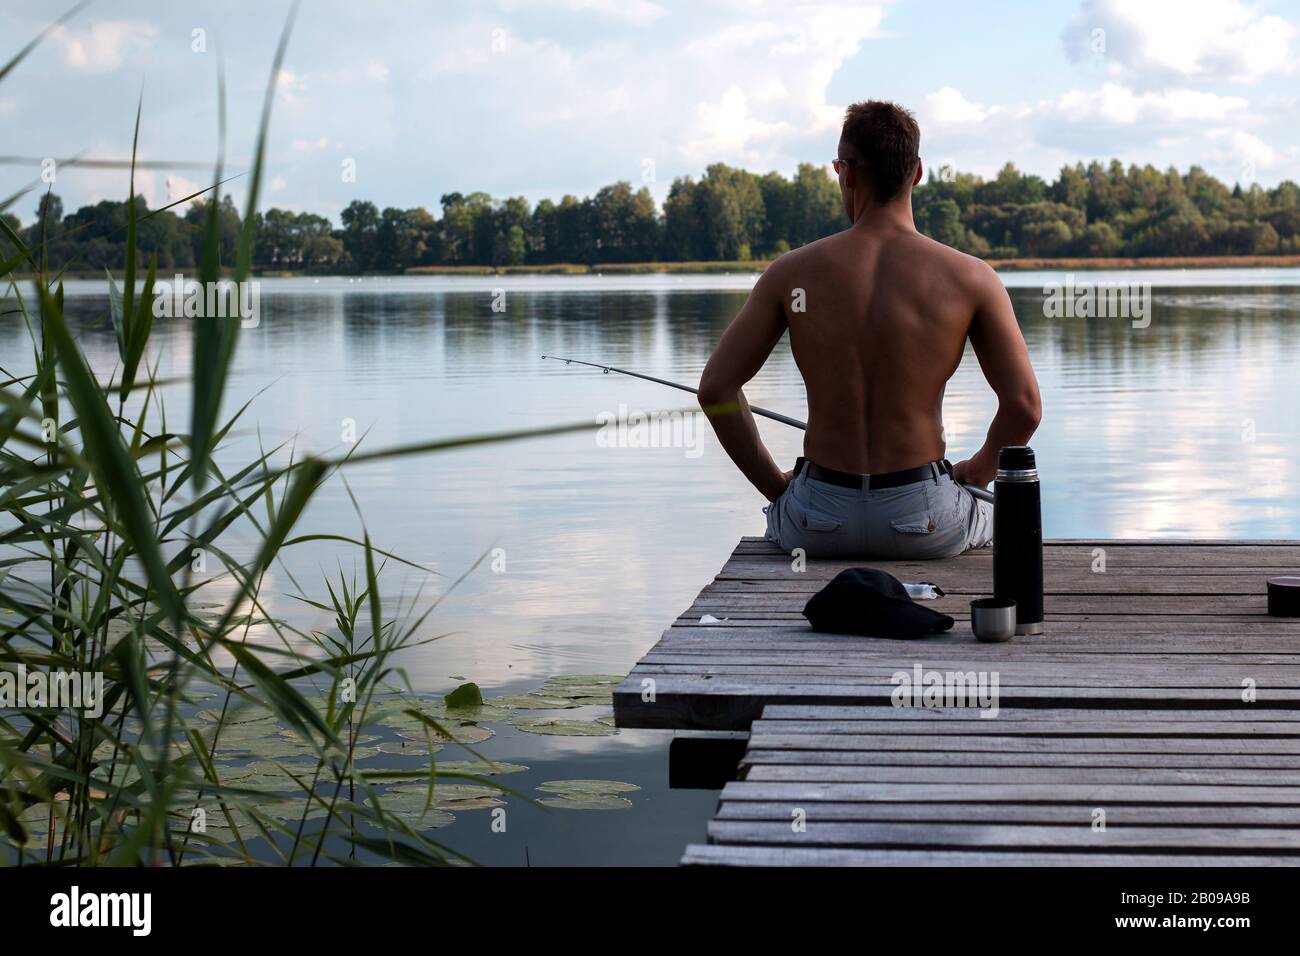 A beautiful man with a bare cake with a fishing rod Stock Photo